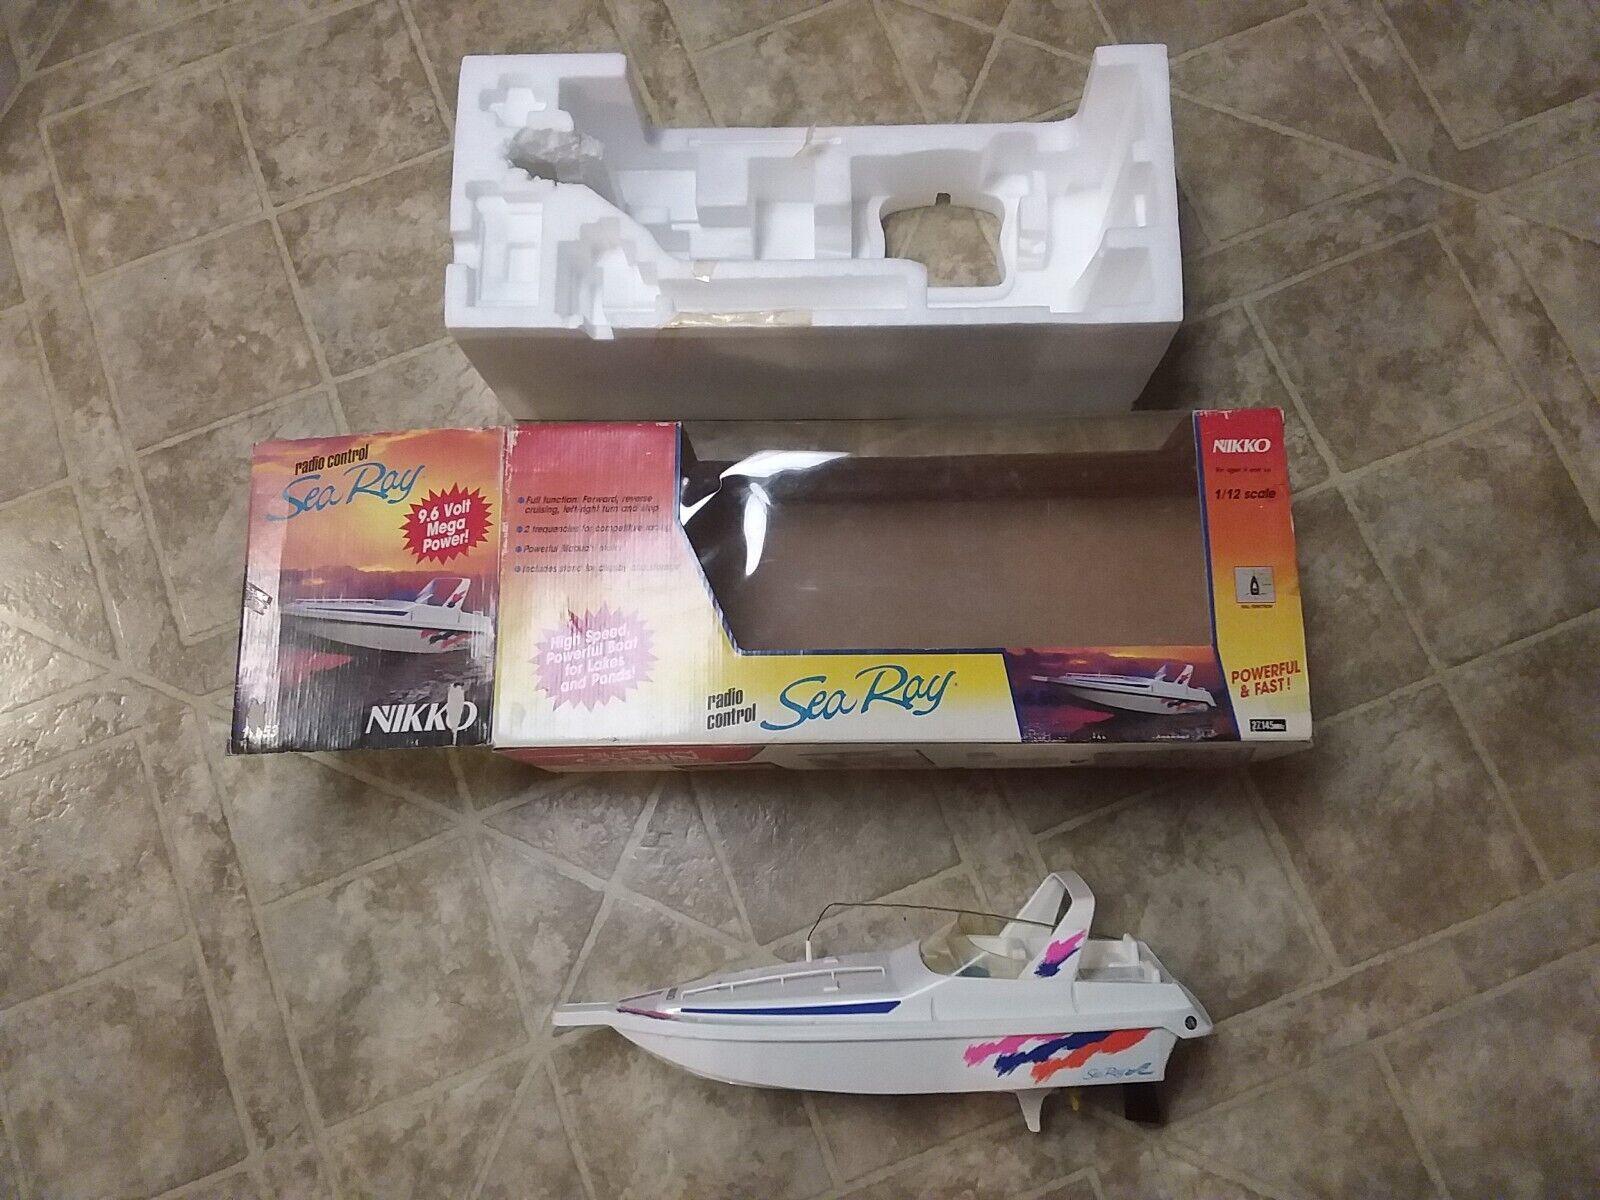 Nikko Radio Control Boat: Stylish and Functional Design: A Top Selling Point of Nikko Radio Control Boat